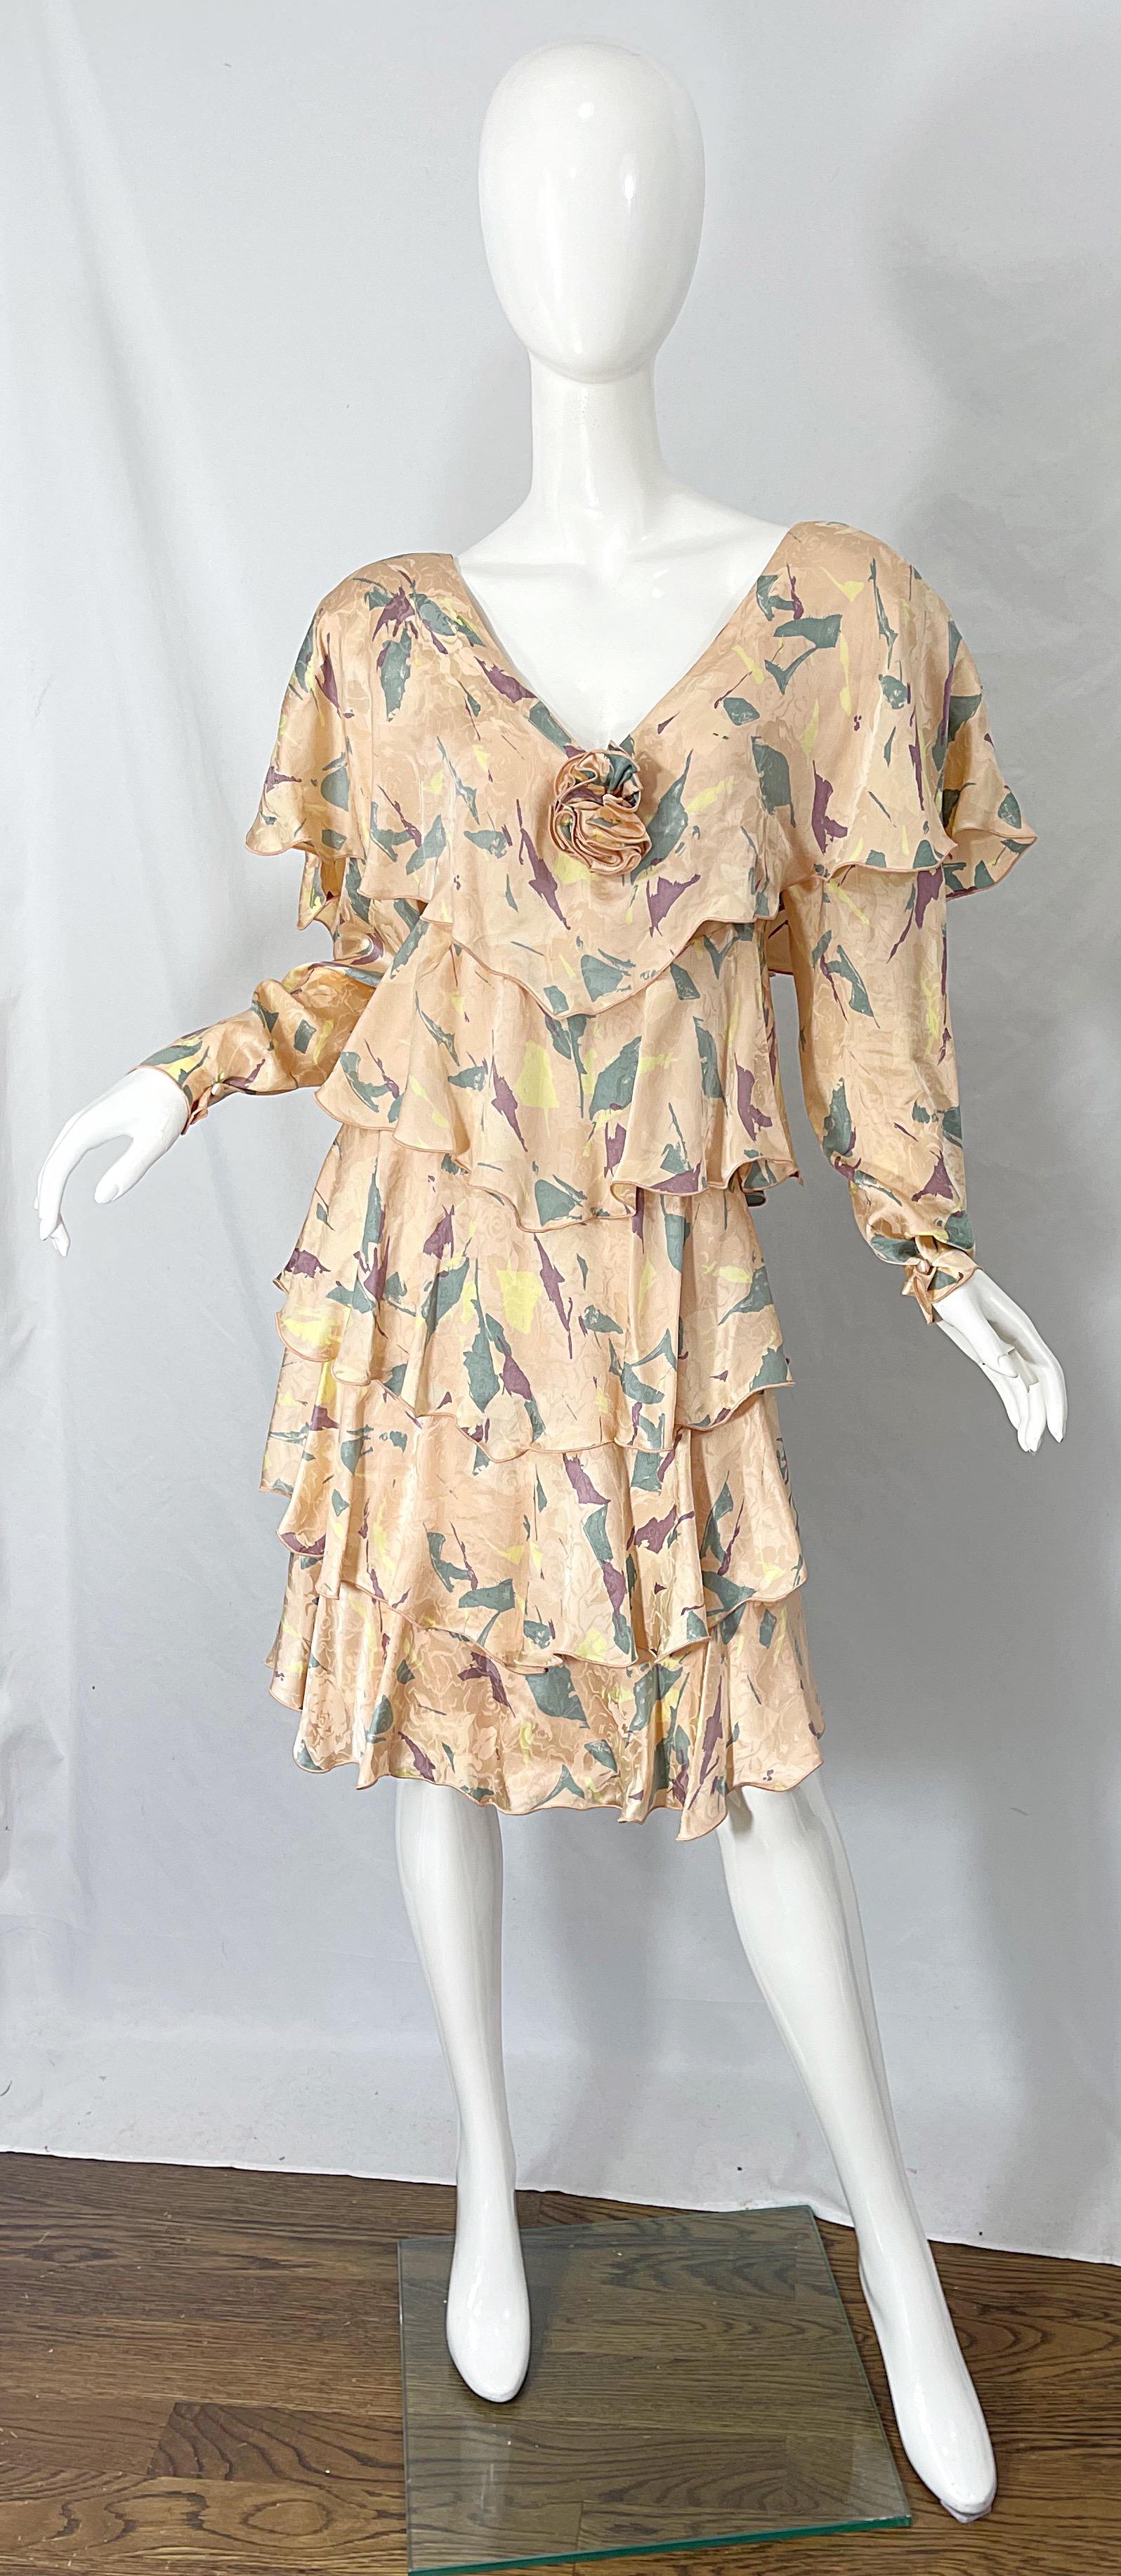 Beautiful early 80s HOLLY’S HARP peach tiered long sleeve silk dress ! Signature Harp style with shoulder pads and rosette at center bust. Sleeve cuffs have button closure. Wonderful warm colors of green, yellow and purple abstracts throughout.